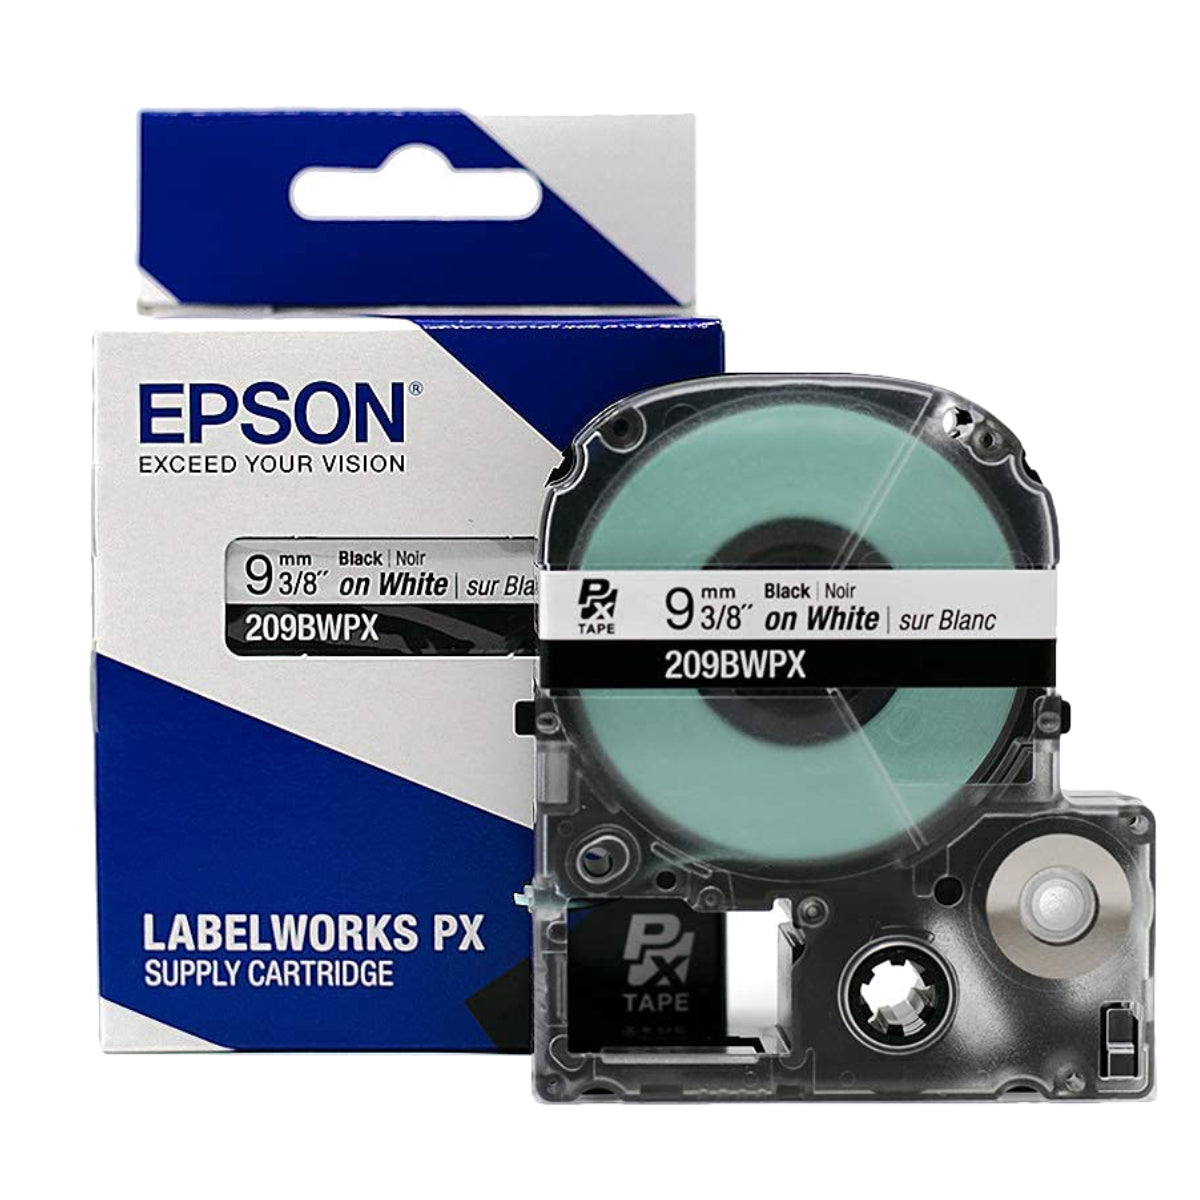 Epson LABELWORKS PX 9mm 209BWPX Tape, Black on White